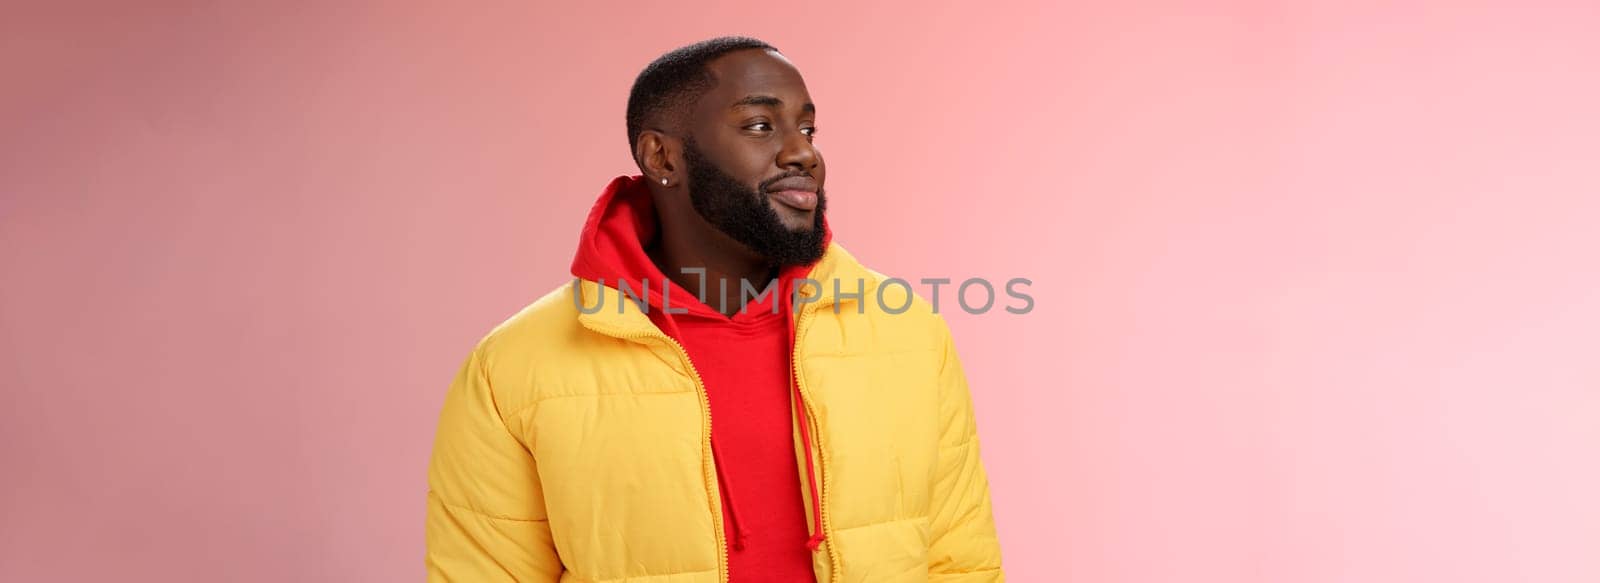 Dreamy happy optimistic black bearded man looking left daydreaming recalling nice moments, enjoying warm peaceful weather walking park feel calm relieved, standing pink background smiling cute.